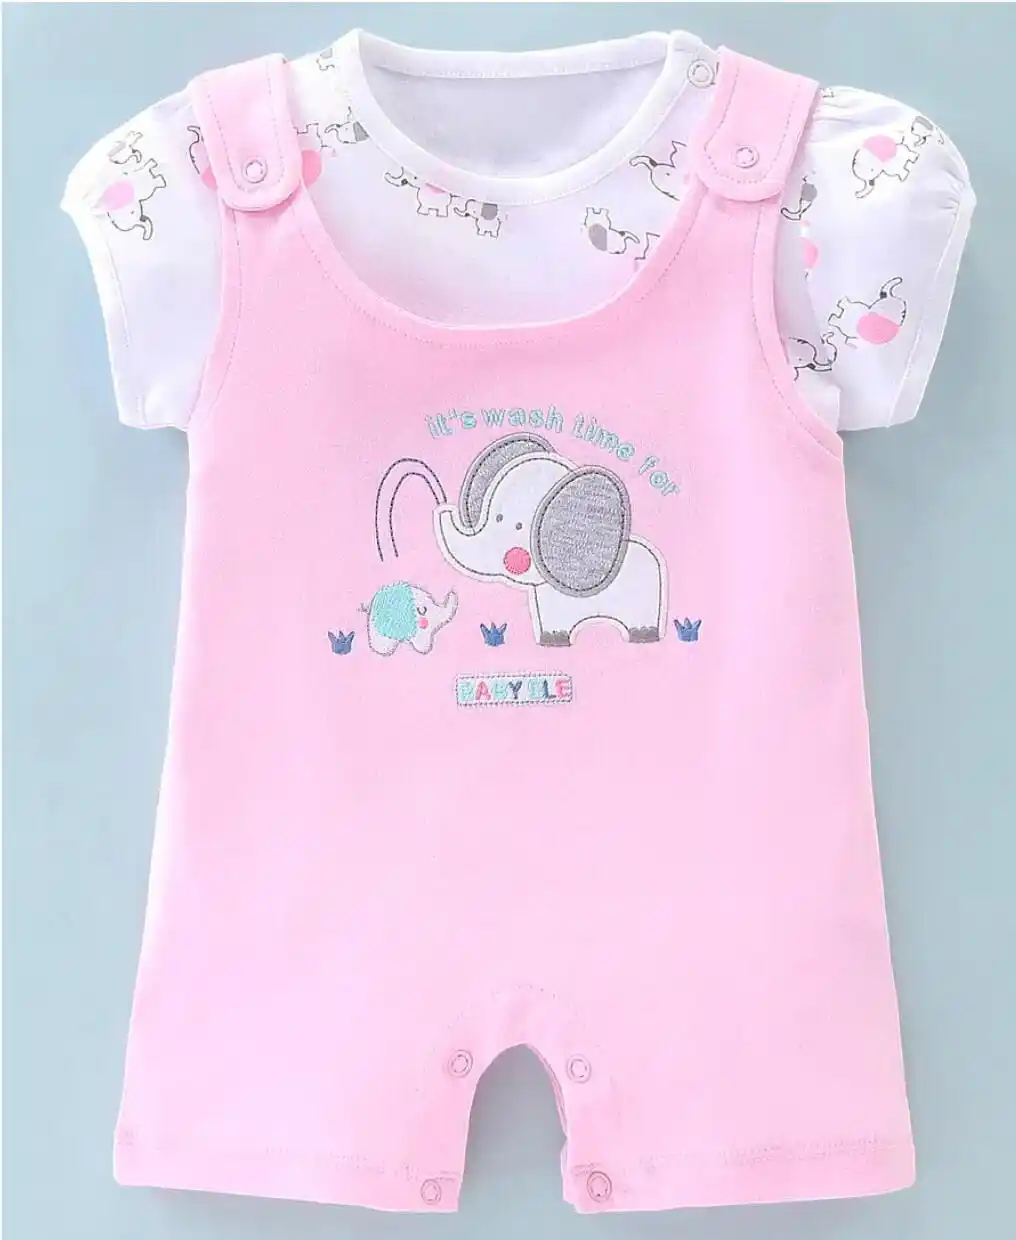 Cotton Knit Elephant Embroidered Dungaree Style Romper with Half Sleeves Inner Tee  Pink